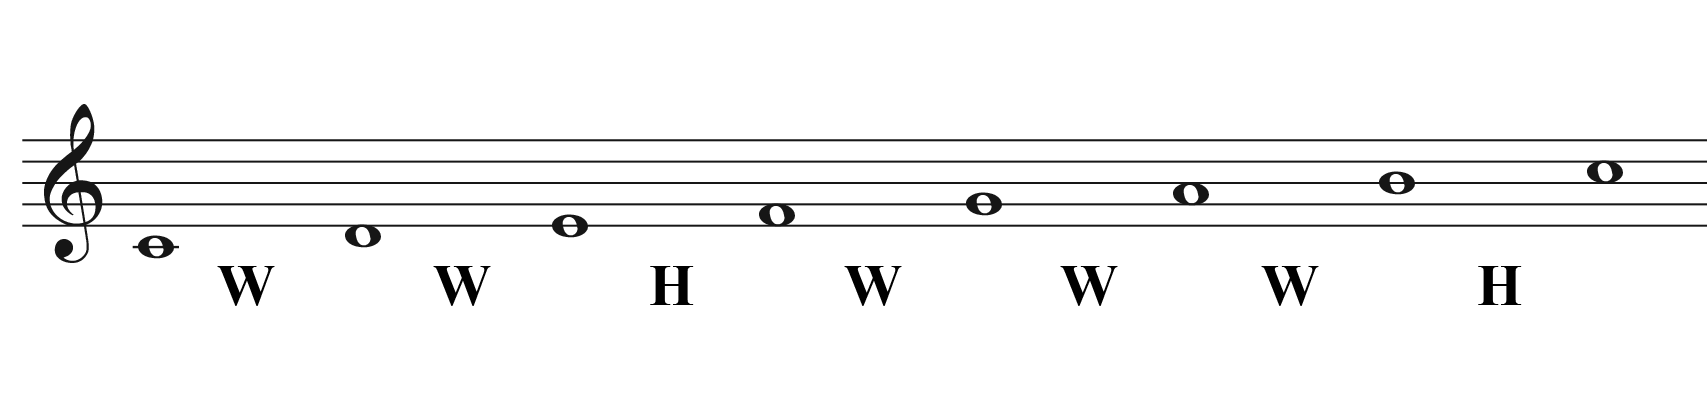 A C Major scale on a staff with whole and half steps labeled.